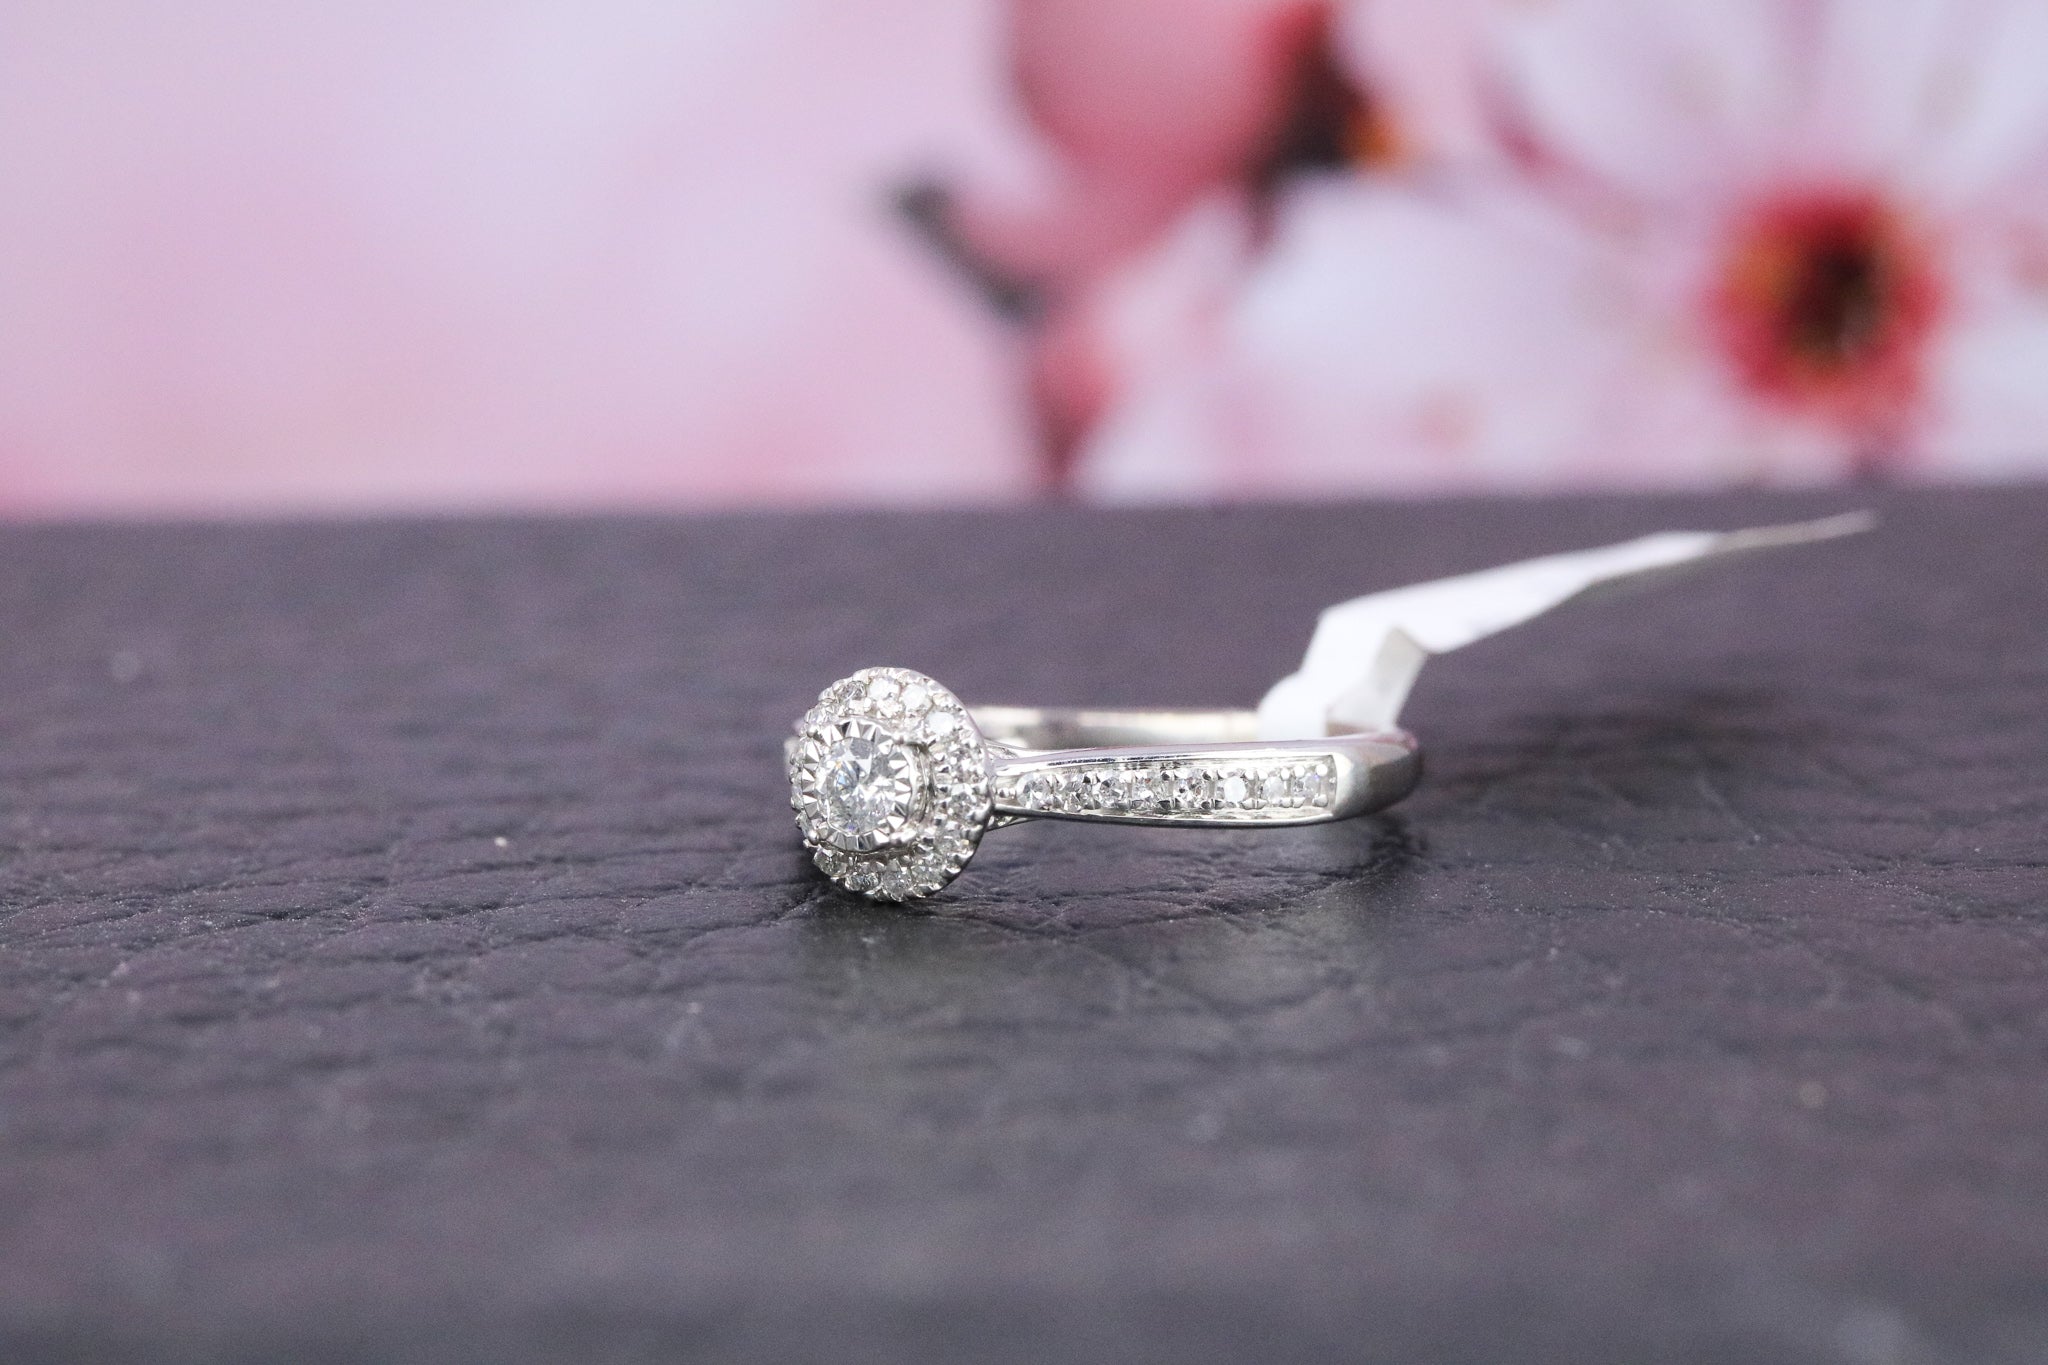 9ct White Gold Diamond Ring - HJ2278 - Hallmark Jewellers Formby & The Jewellers Bench Widnes